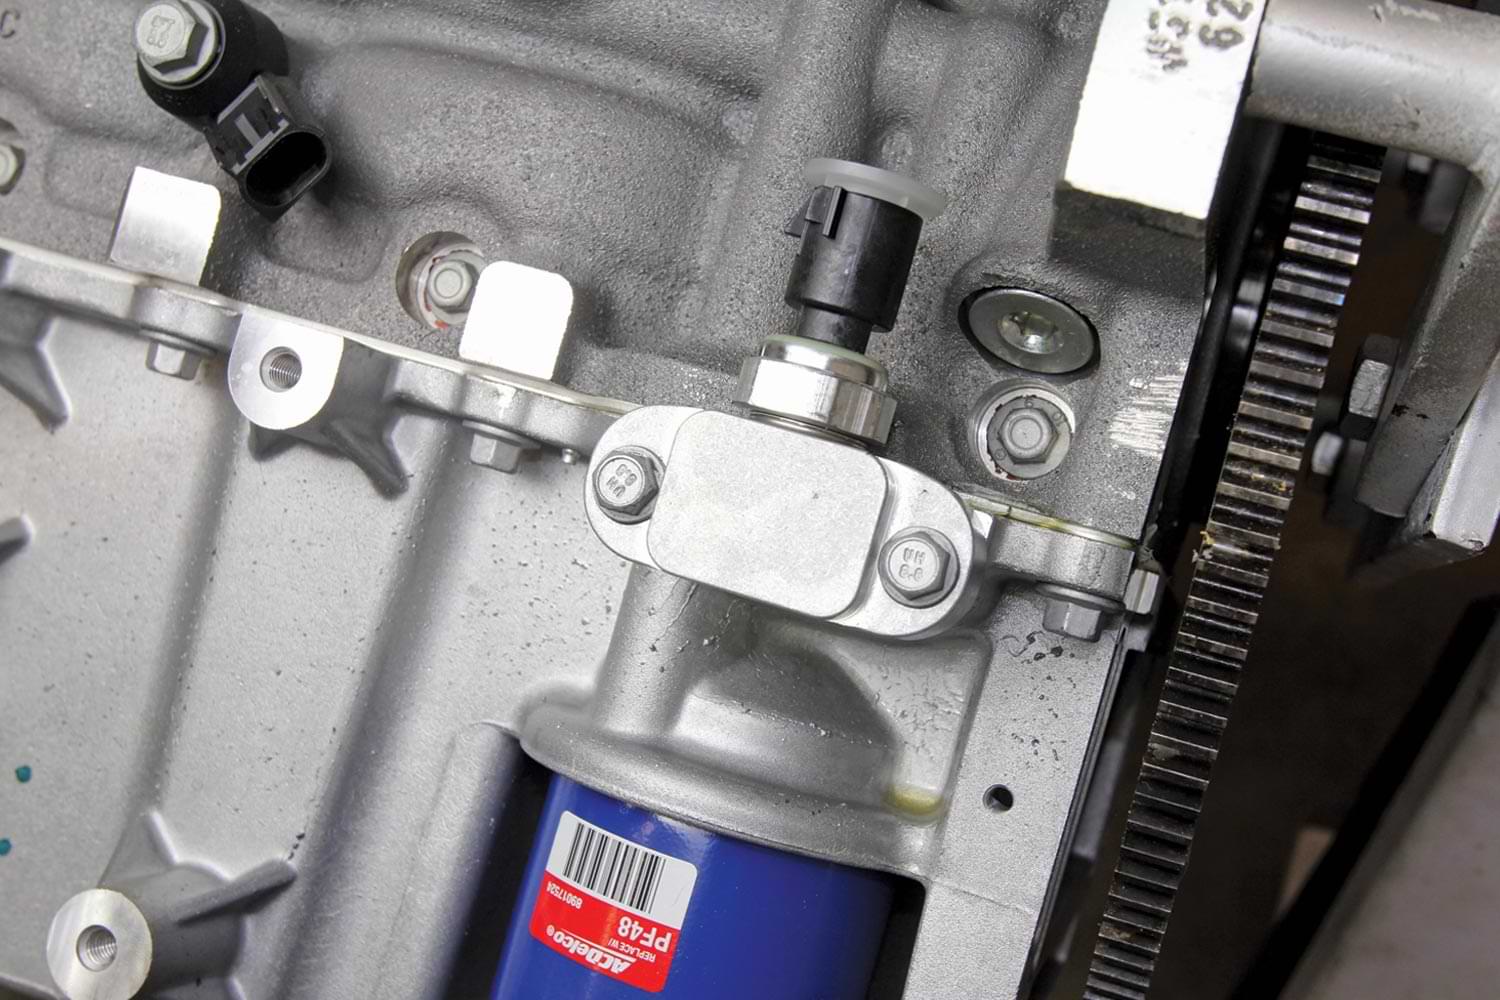 view of the port at the top of the rear of the block that accepts an oil pressure sensor